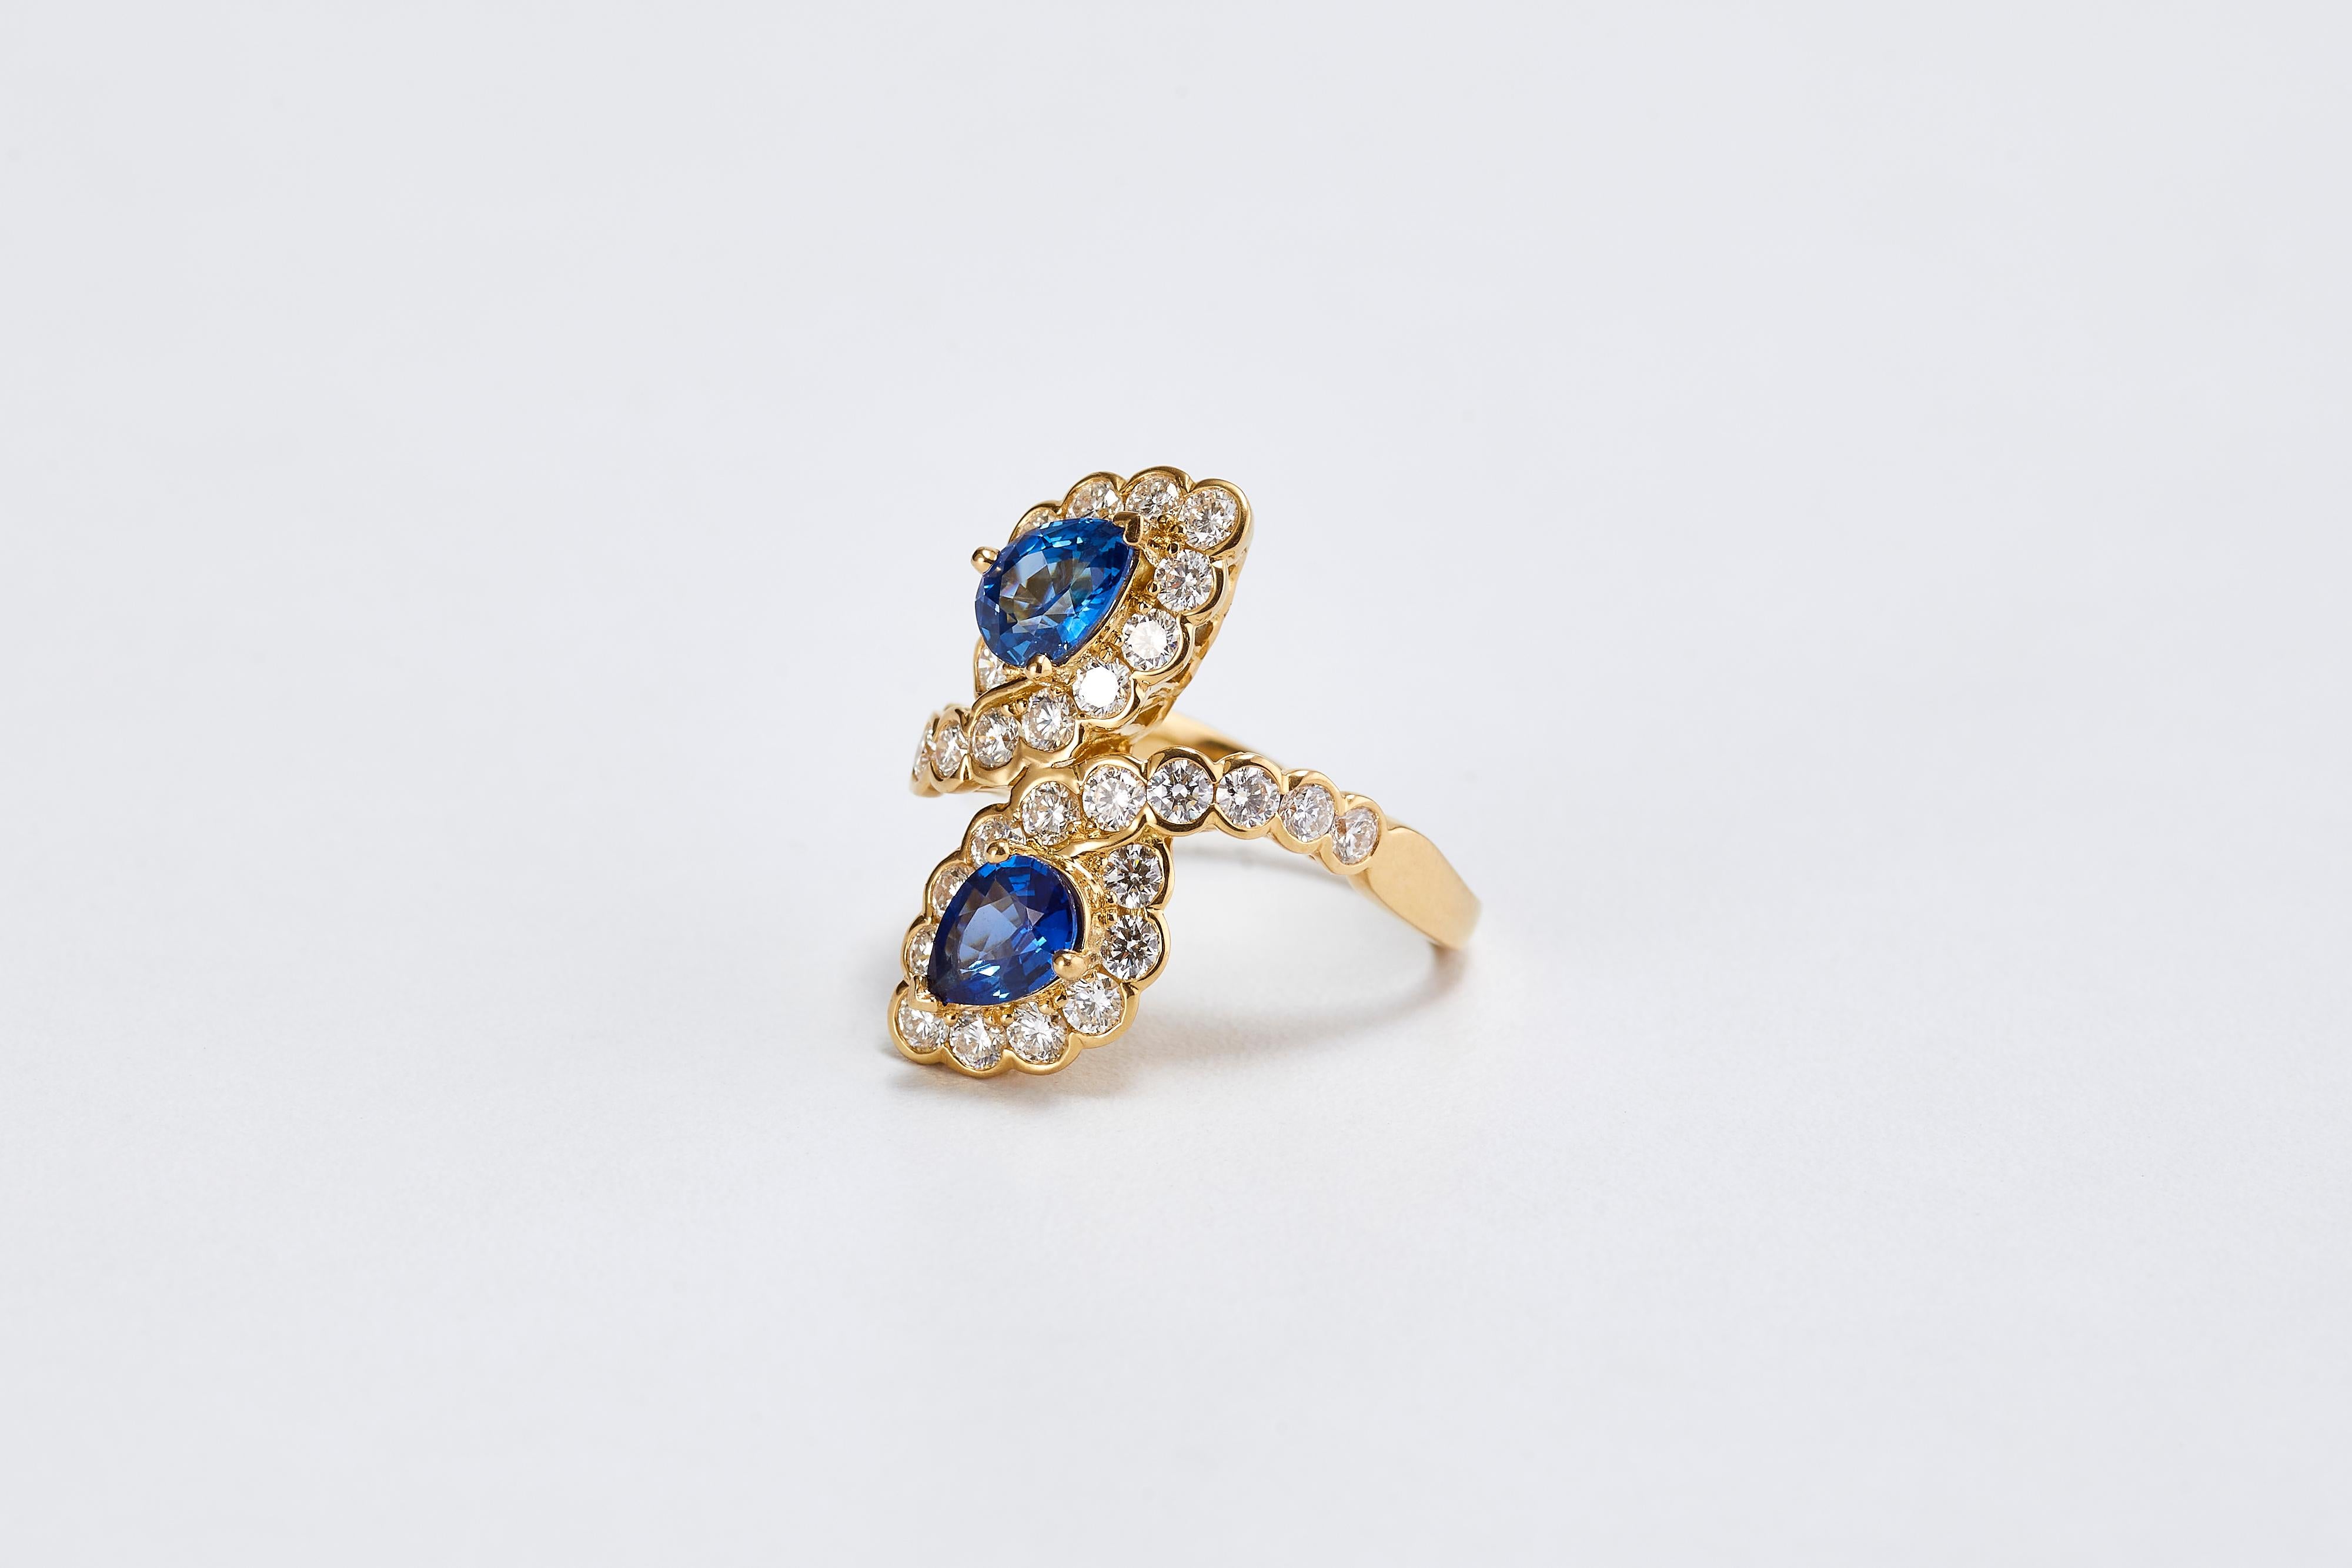 Van Cleef & Arpels Gold Ring with 2 Pear Natural Blue Sapphires And Diamonds.
A gorgeous VCA yellow gold 18K ring. With 2 blue, pear shape cut sapphires in the center. 
Measurements of the sapphires are approximate 6.30 x 5mm, totalling in 1.20 ct